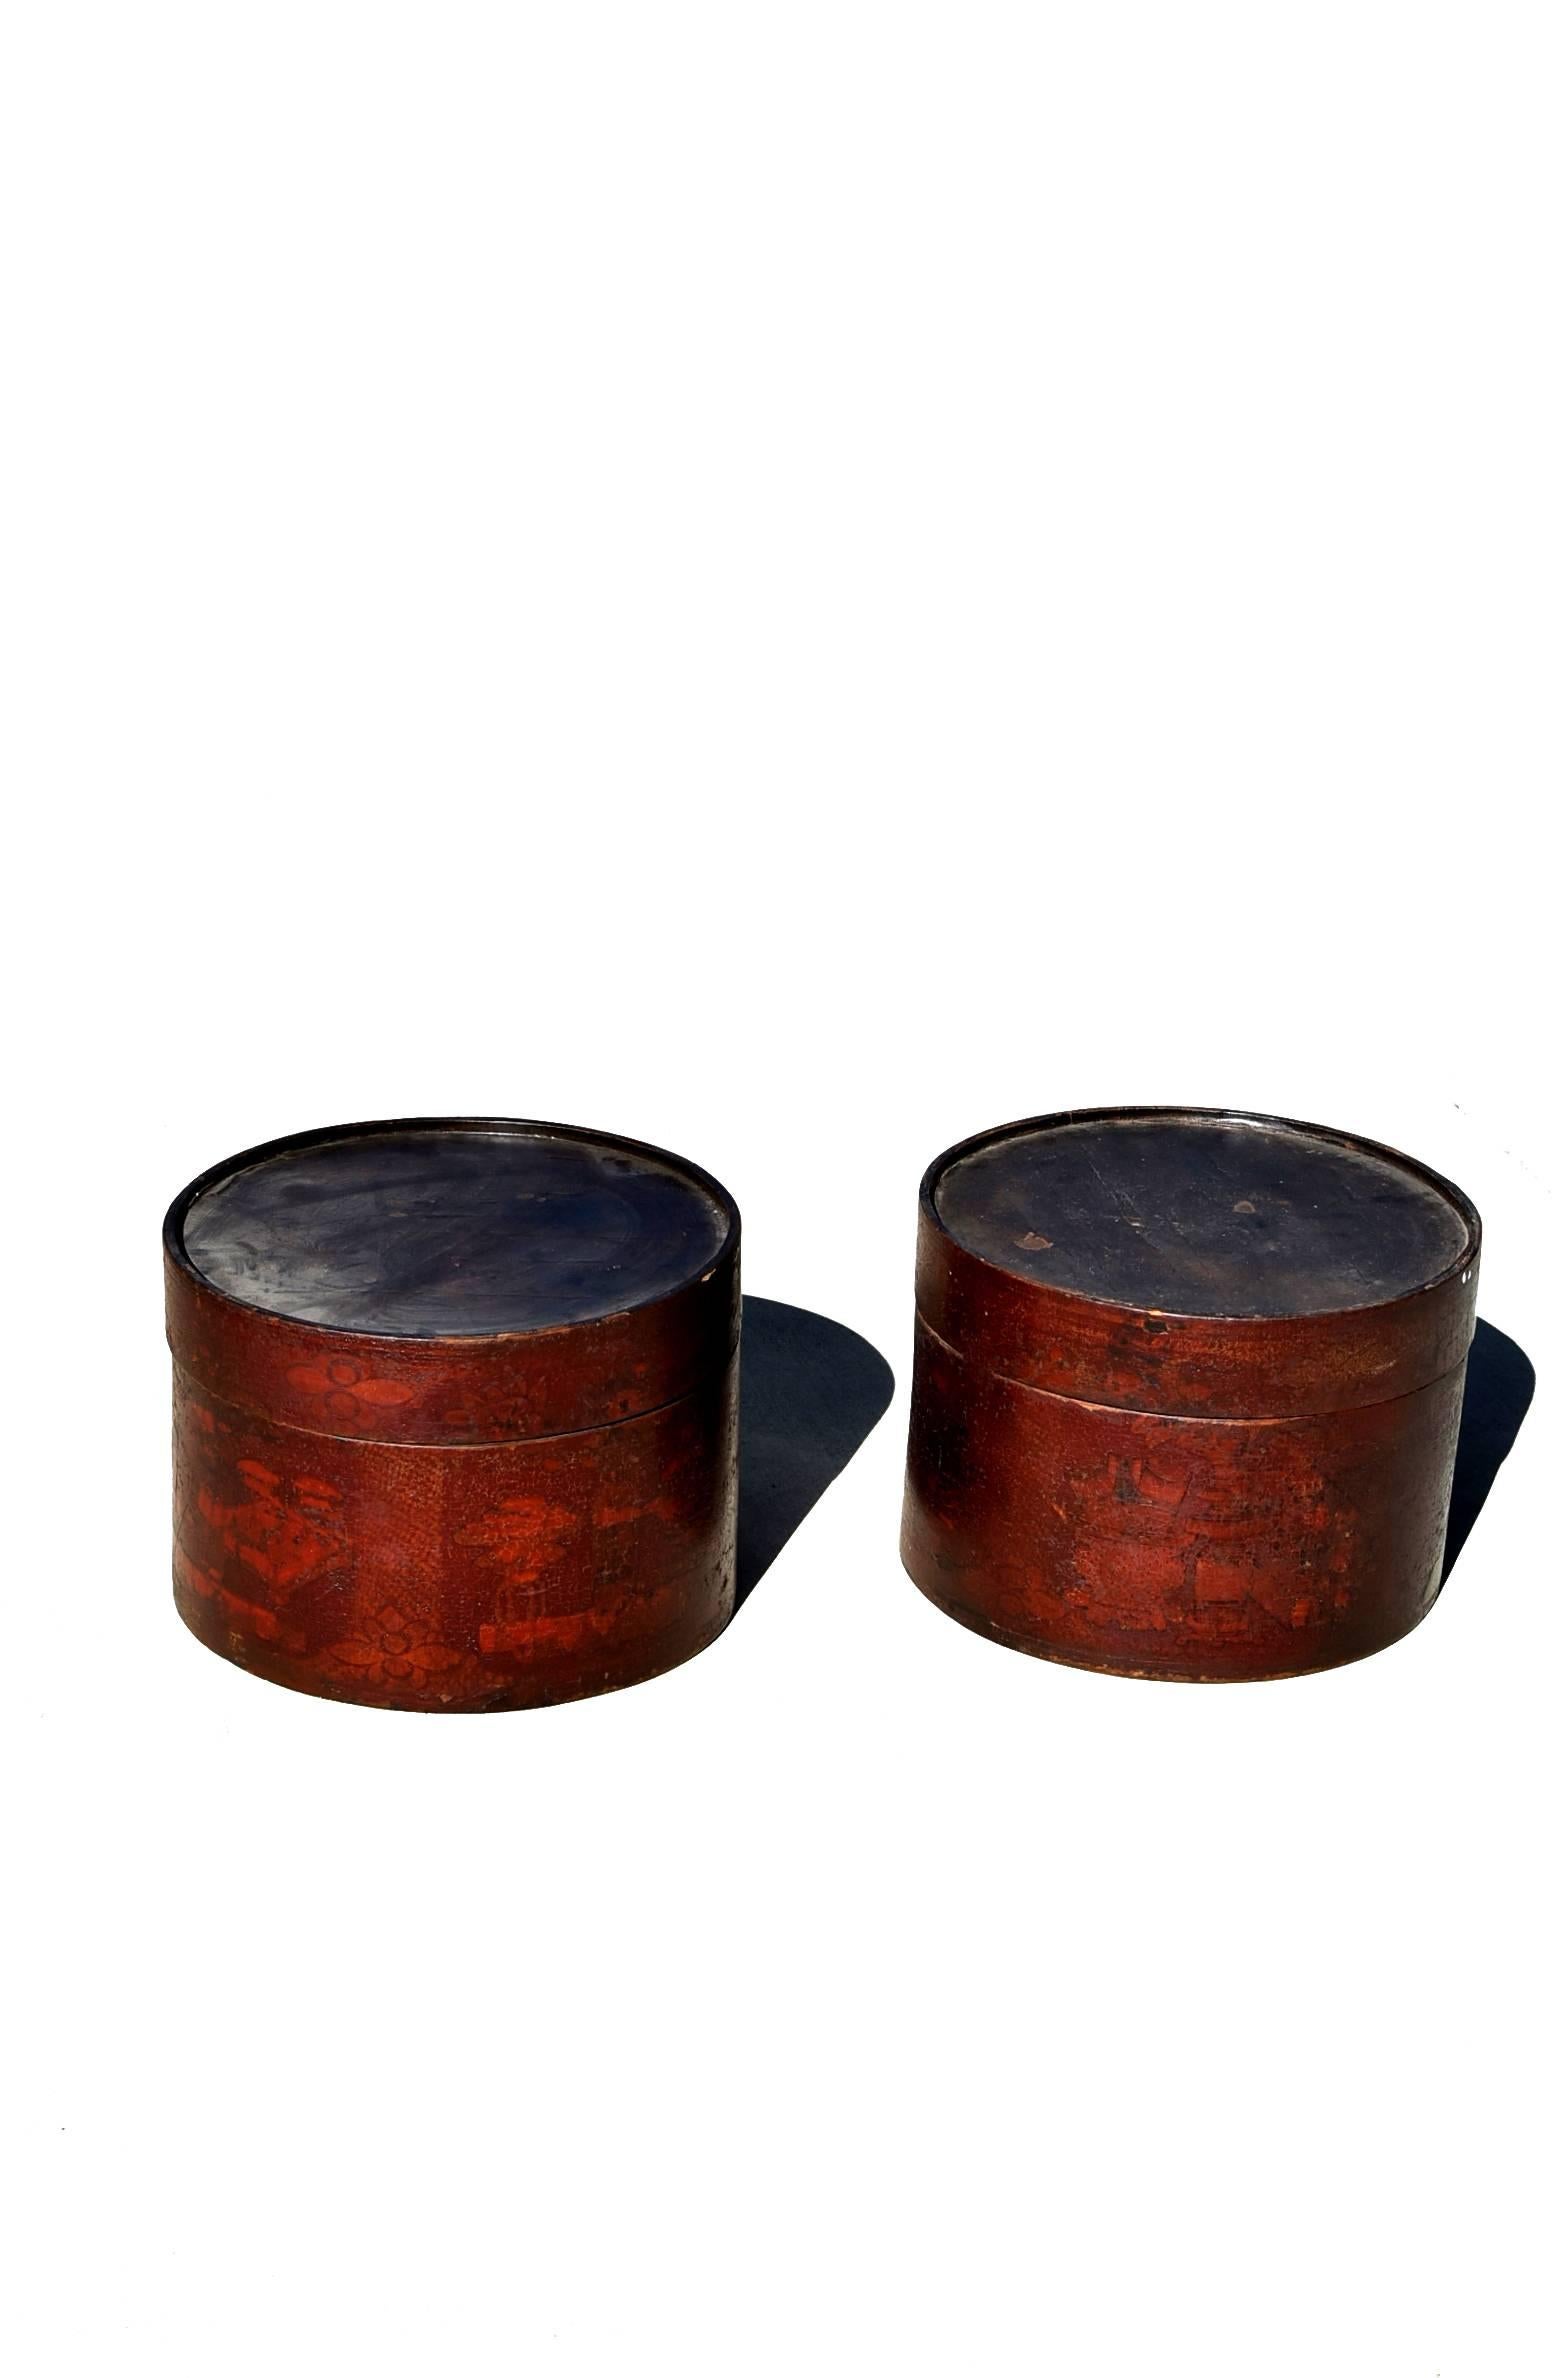 A pair of beautiful round boxes. Boxes are hand-painted with flowers and vases. Crackled patina enhances the charm.